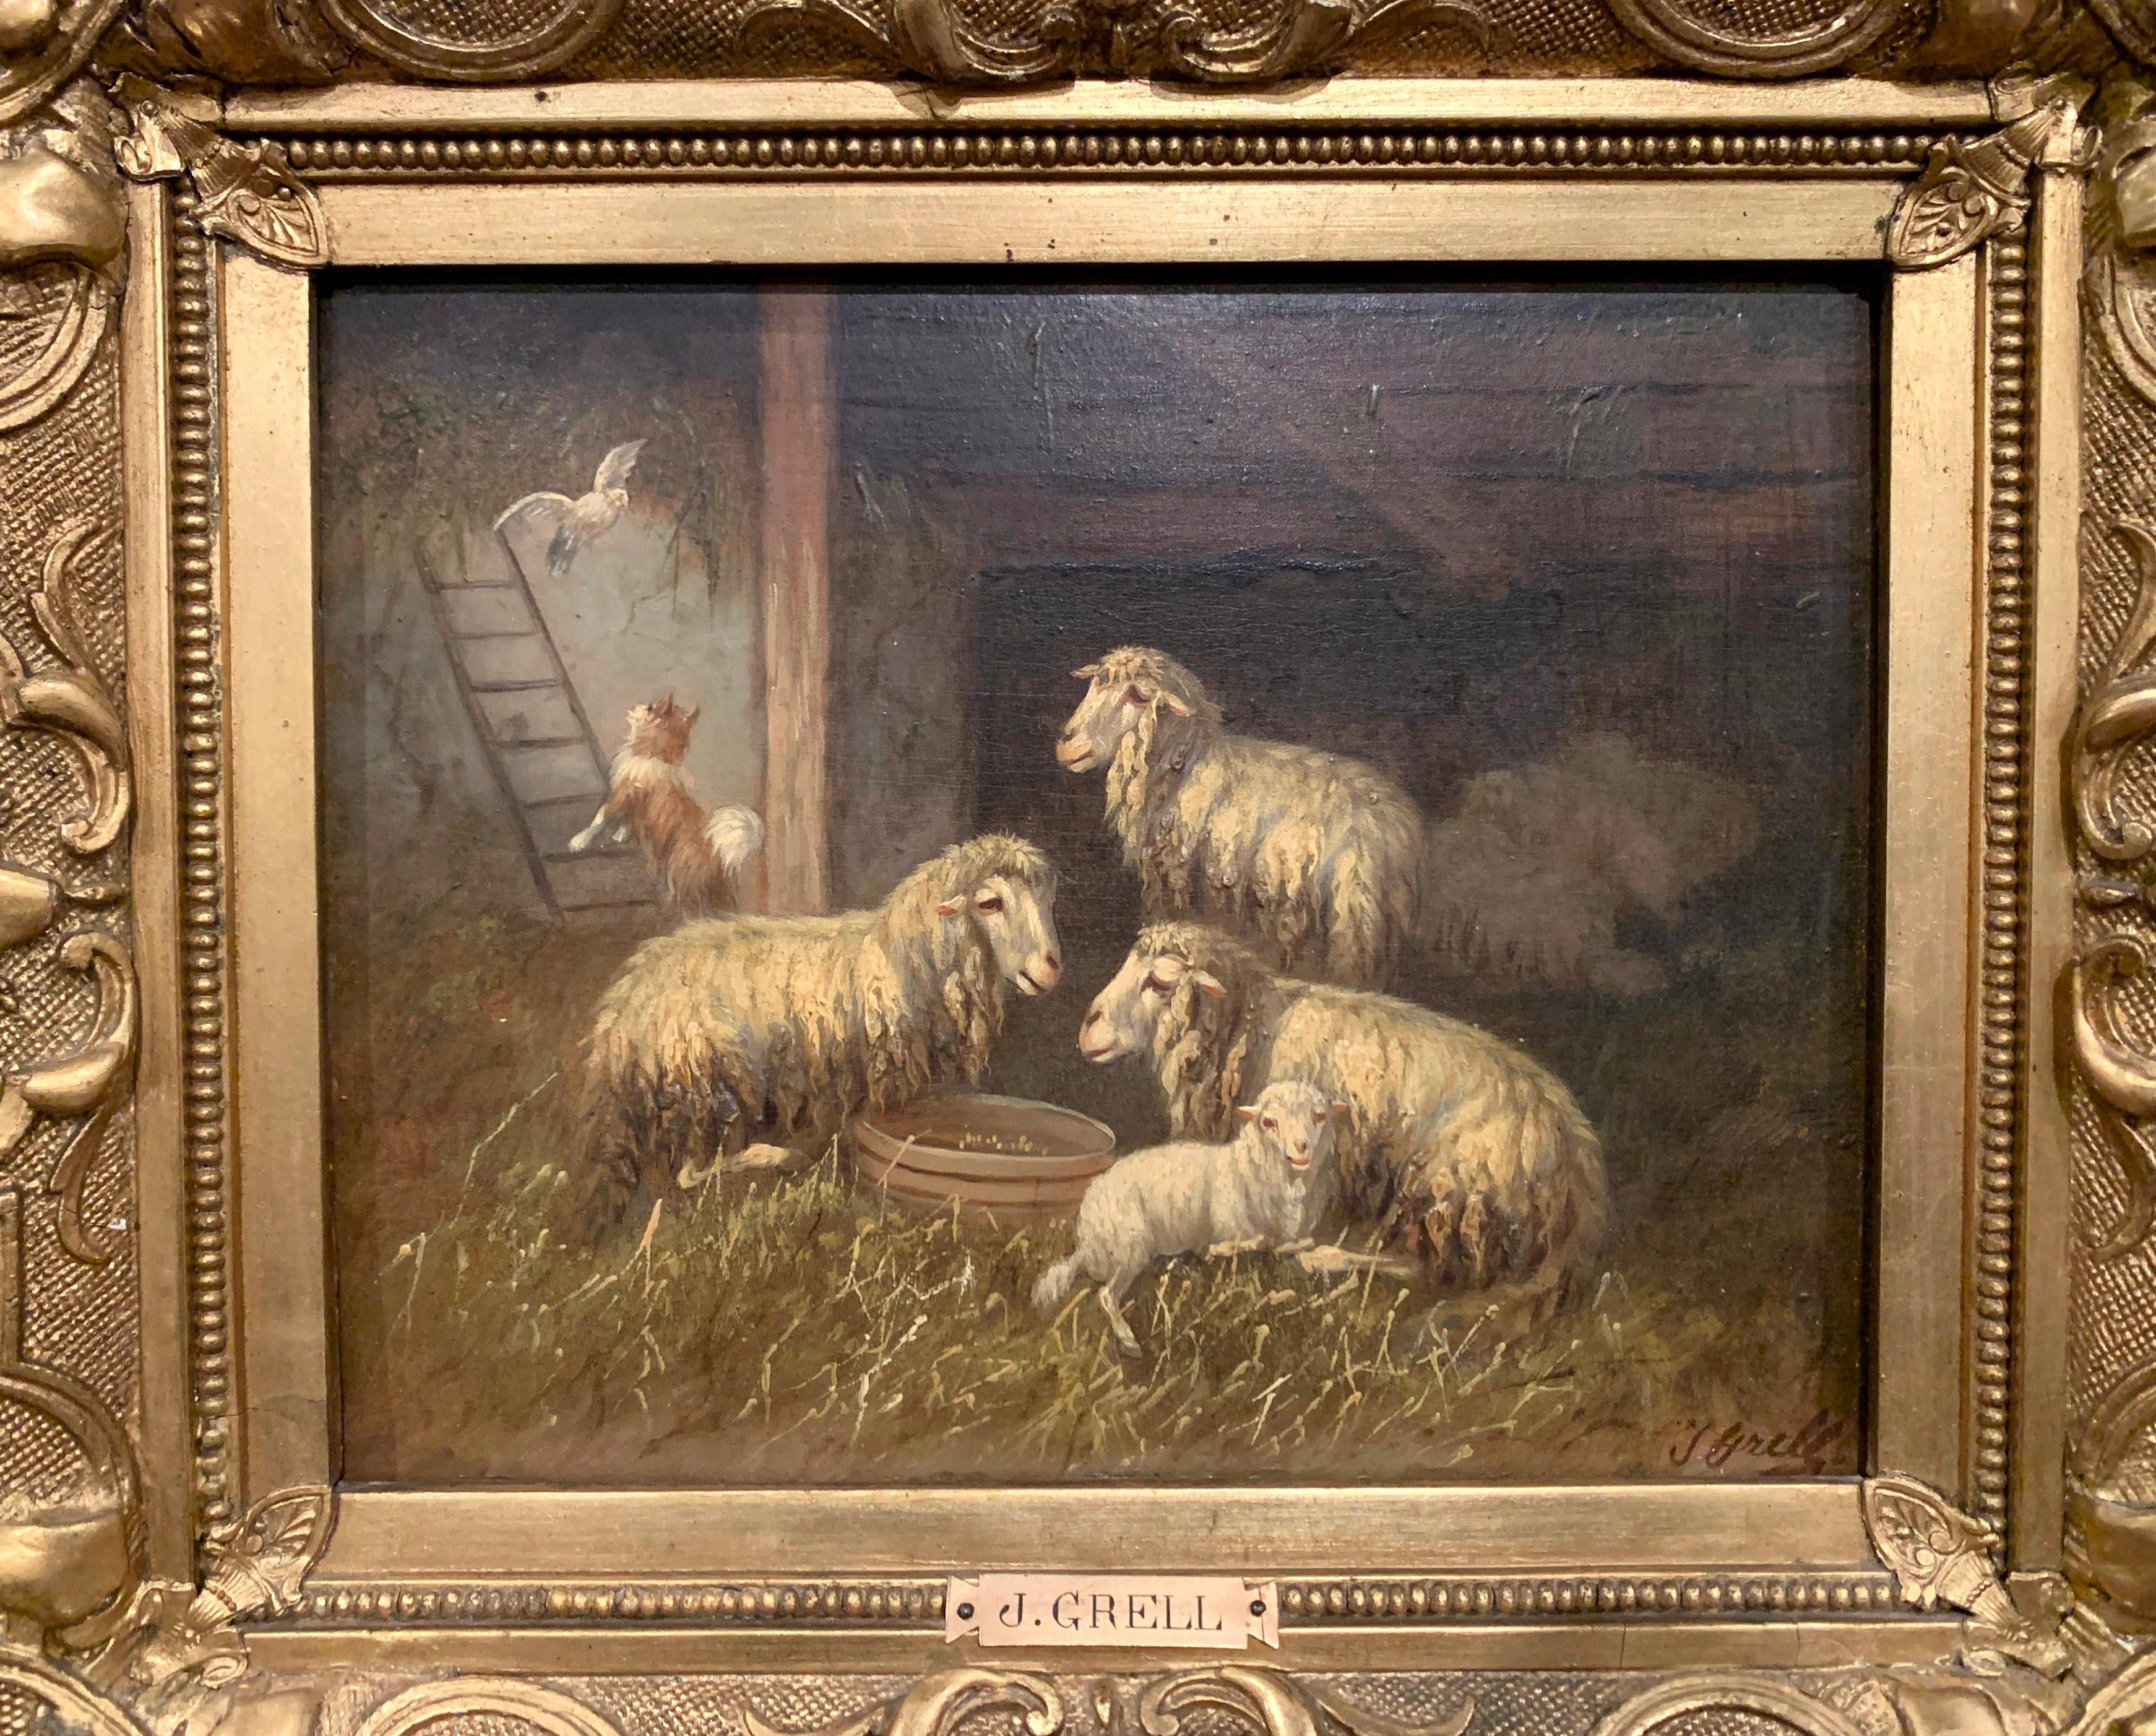 Set in the original carved giltwood frame, the oil painting on board was created in Austria circa 1890, the artwork is signed on the lower right by the artist Johanna Grell, embellished with a brass plaque bearing her name. The painting depicts a